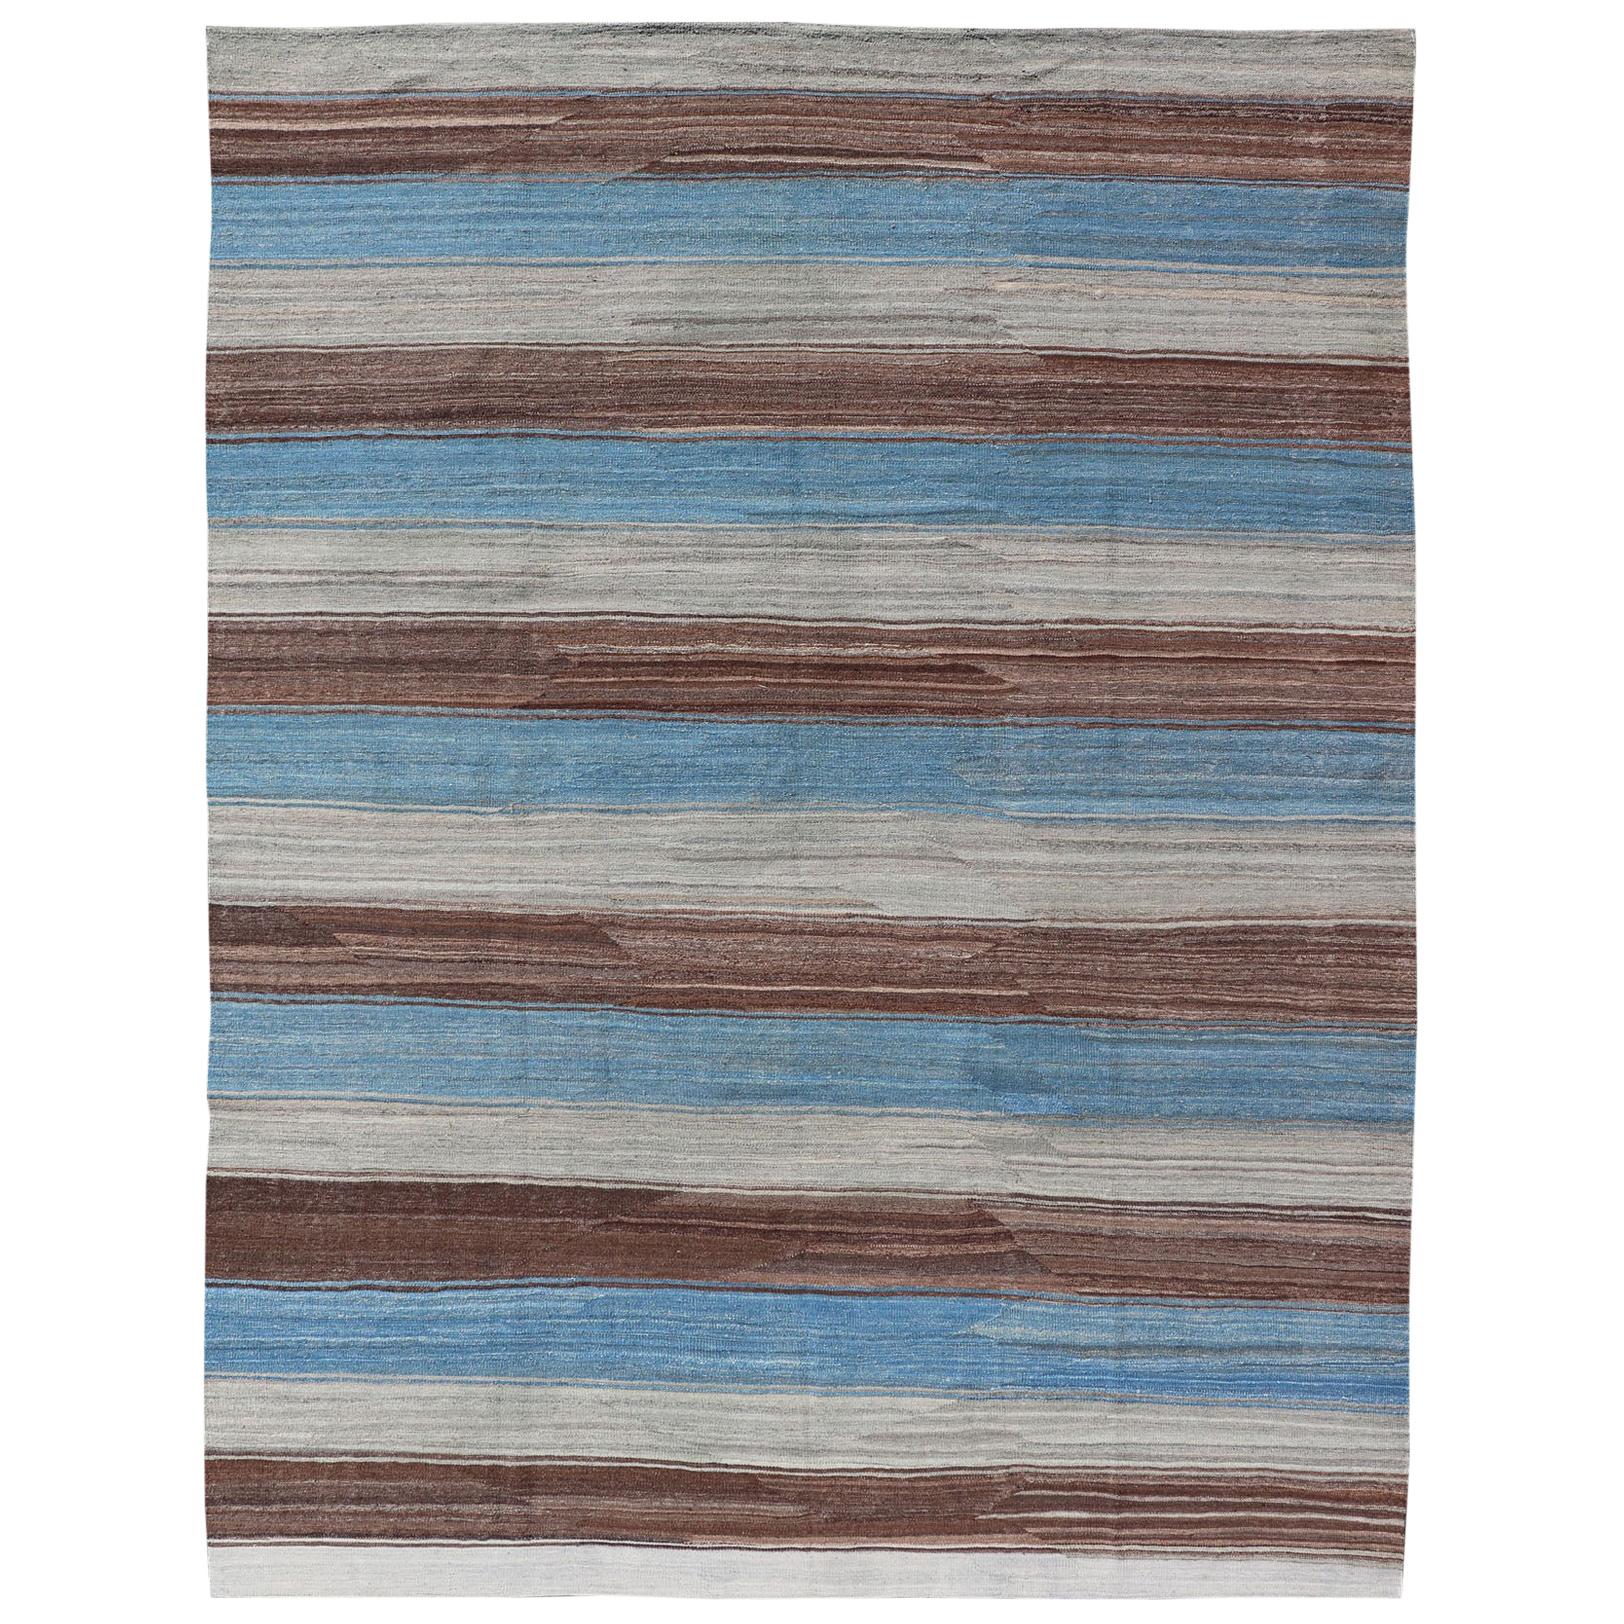 Modern Kilim Rug with Stripes in Shades of Blue, Brown, Light Gray and Cream For Sale